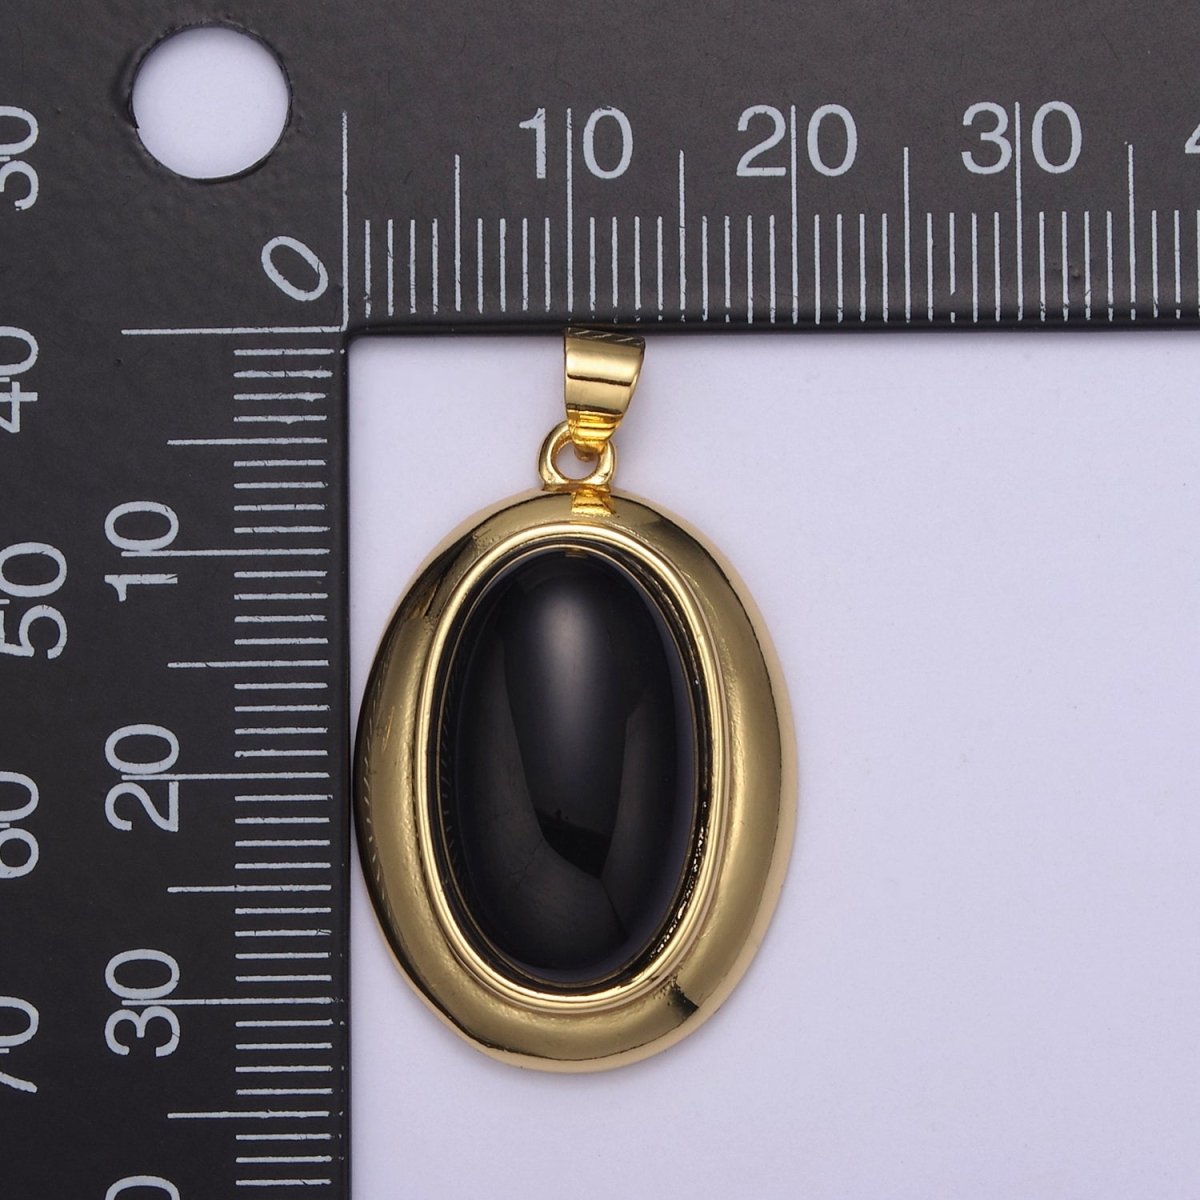 Black Onyx Oval Charm Natural Gemstone Beads For Necklace Pendant H-619 - DLUXCA